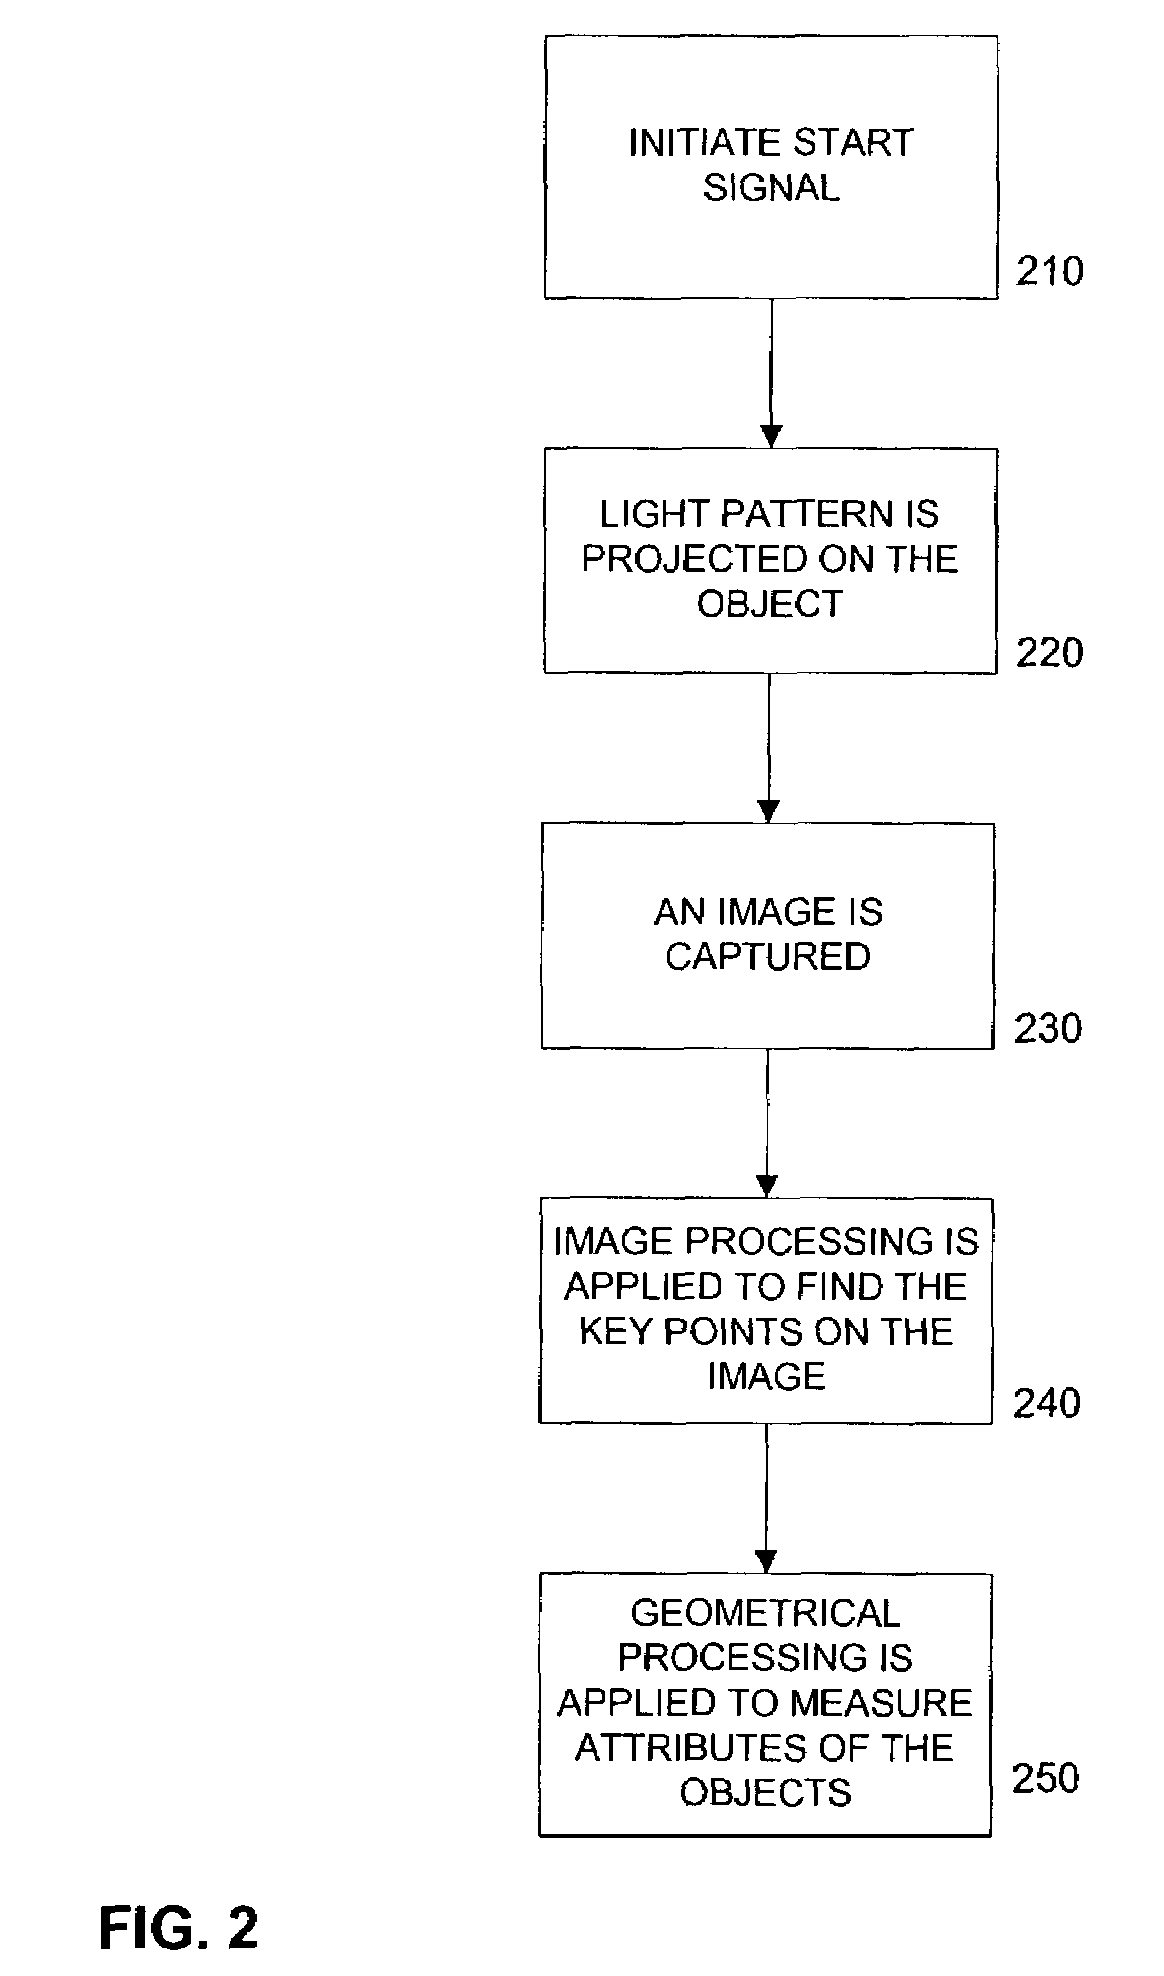 Optical methods for remotely measuring objects